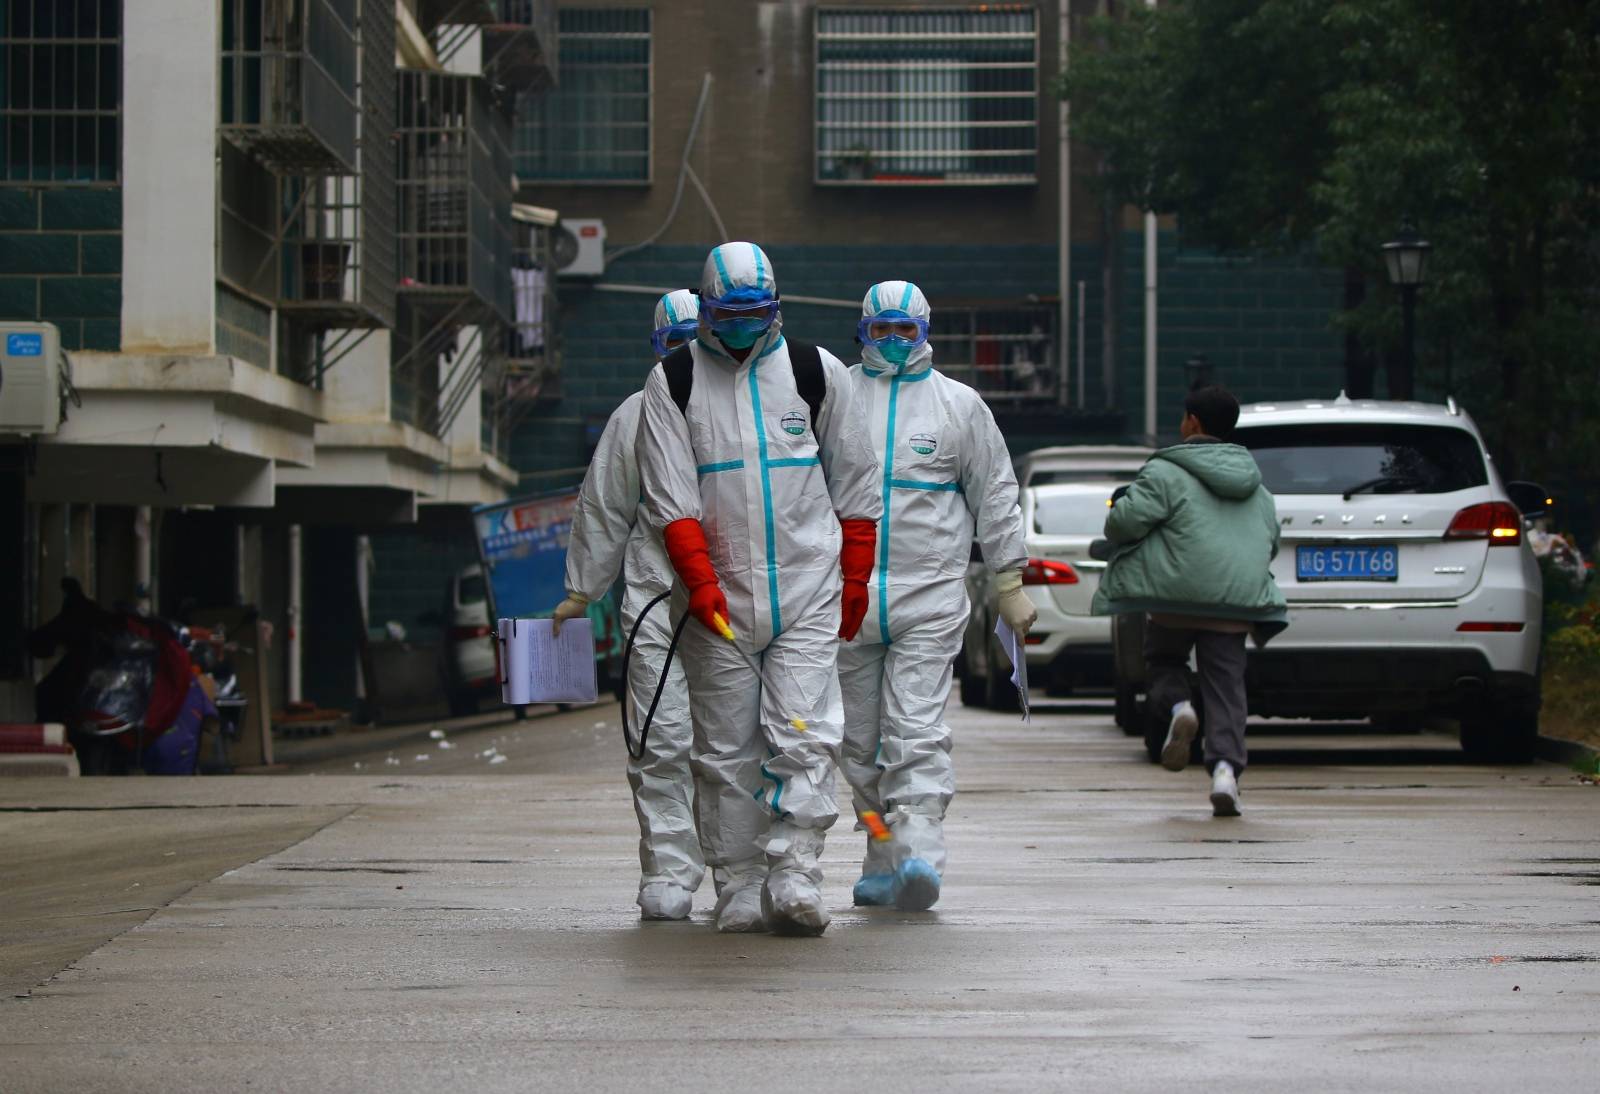 Workers from local disease control and prevention department in protective suits disinfect a residential area following the outbreak of a new coronavirus, in Ruichang, Jiangxi